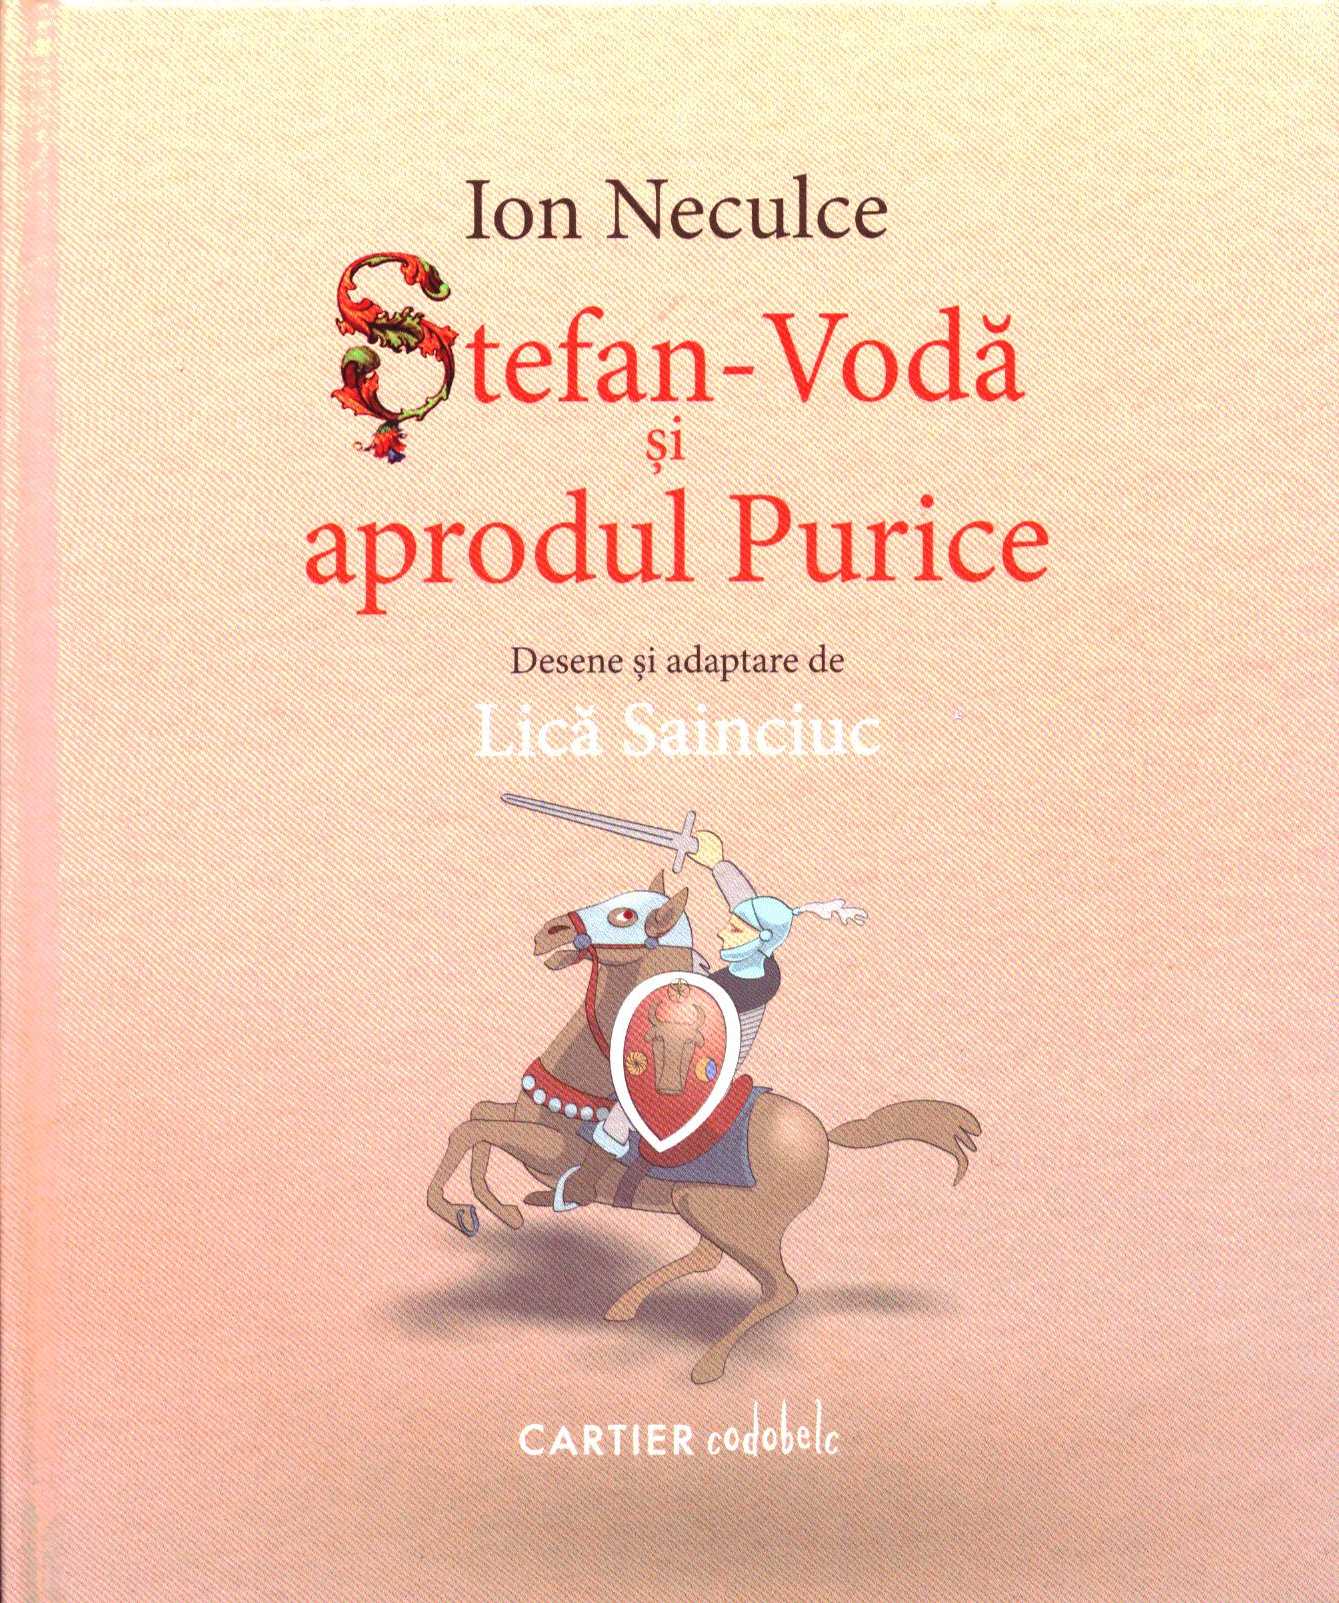 Stefan-Voda si aprodul Purice - Ion Neculce